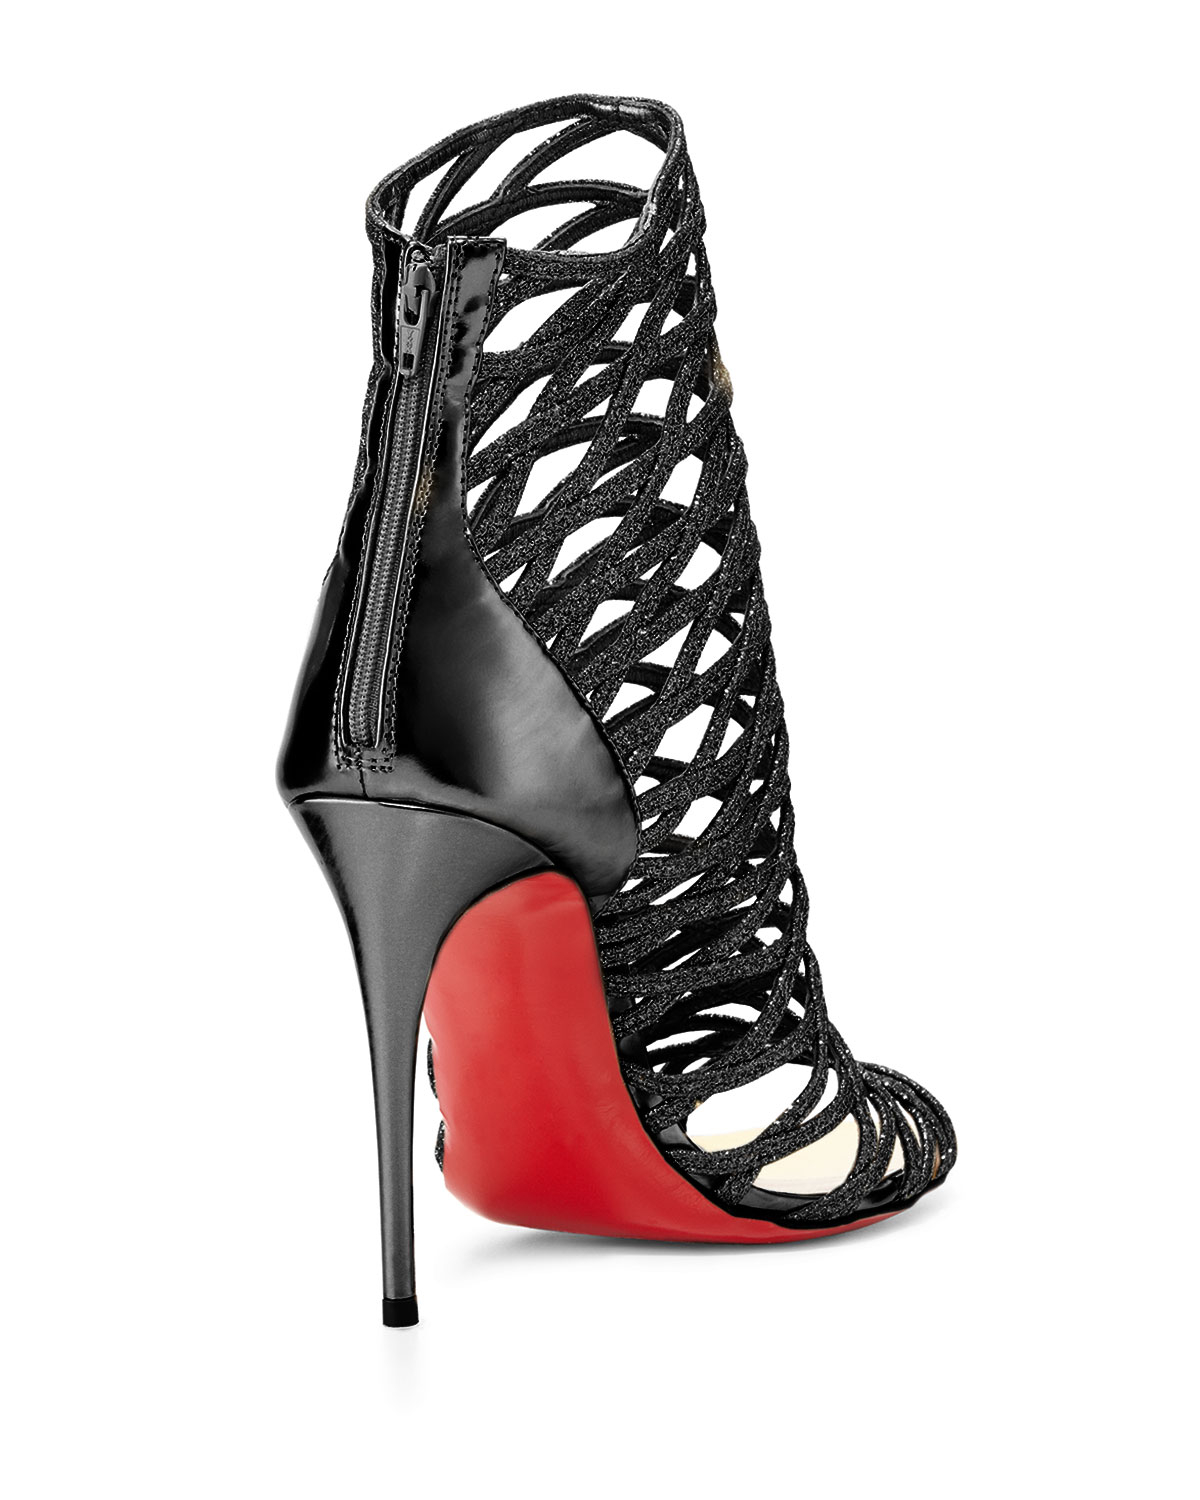 Christian Louboutin Mille Cinque Glitter Lattice Red Sole Bootie - Lyst